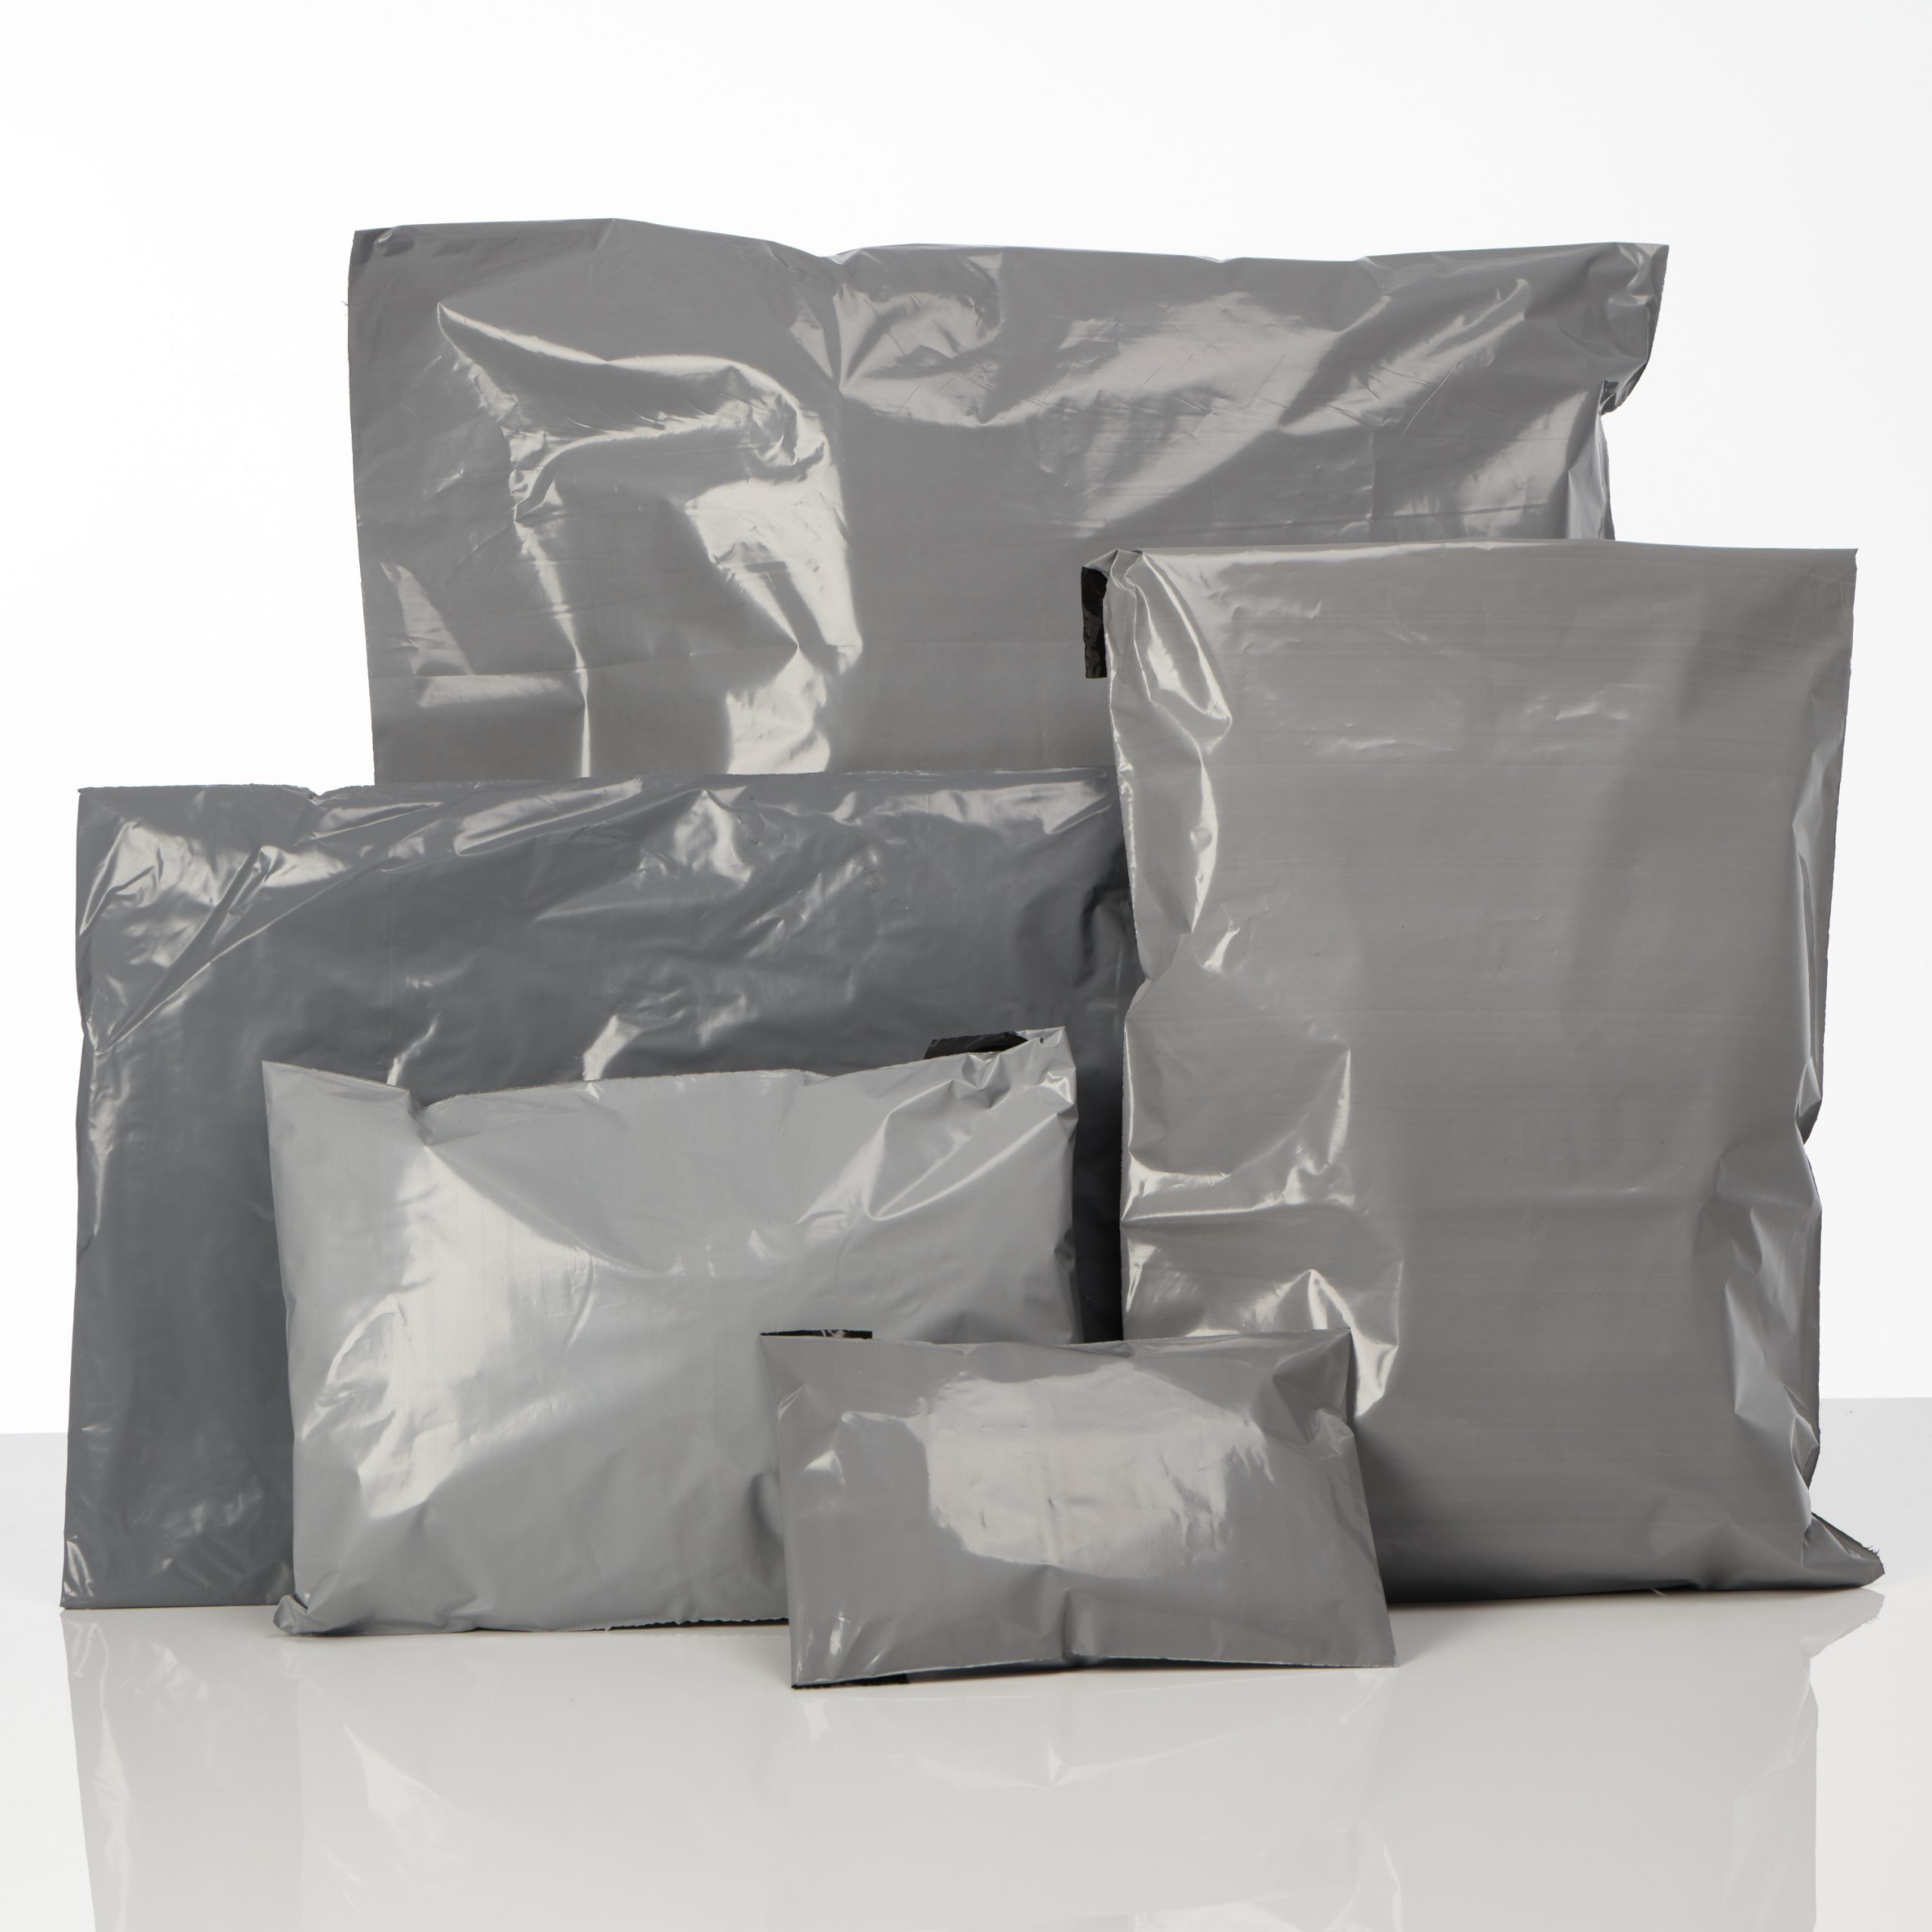 100 Bags  All Sizes Grey Mailing Bags Recyclable Post Plastic Poly Self Seal UK 